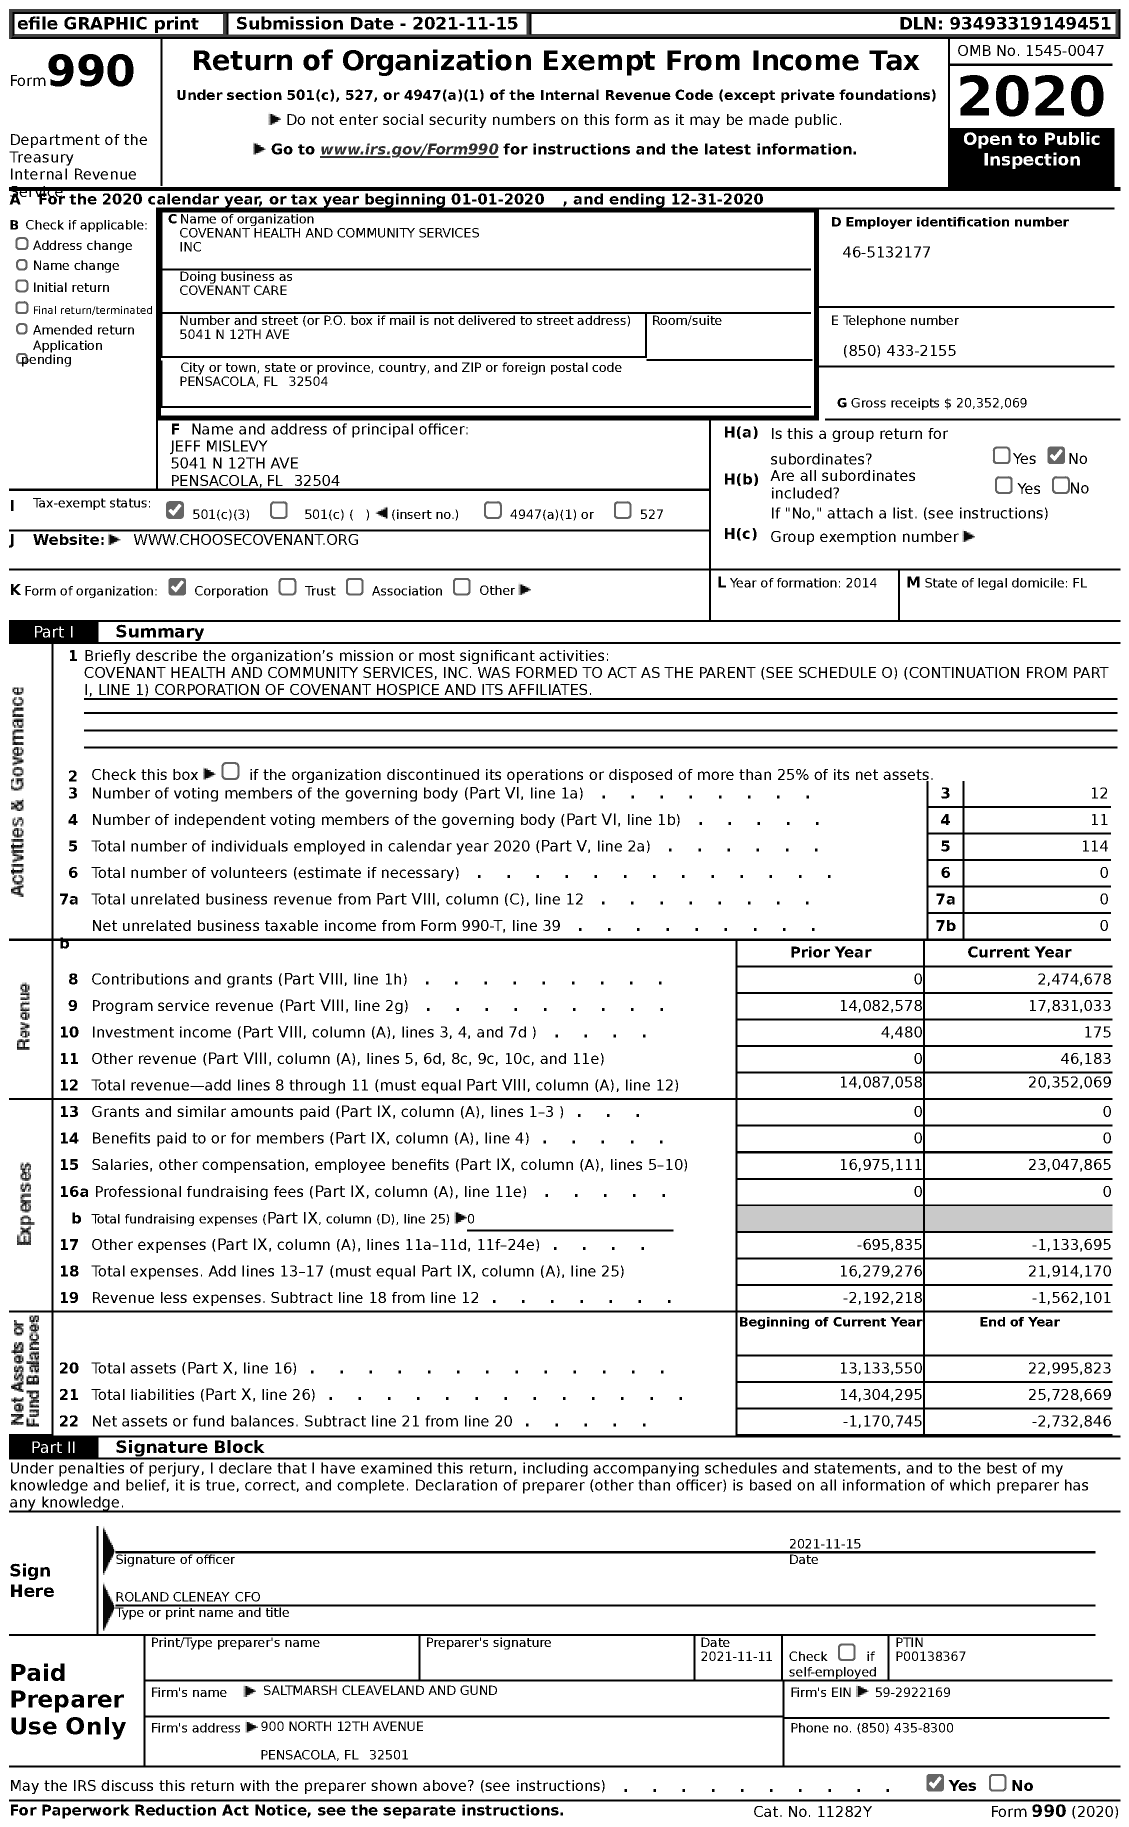 Image of first page of 2020 Form 990 for COVENANT Care / Covenant Health and Community Services Inc